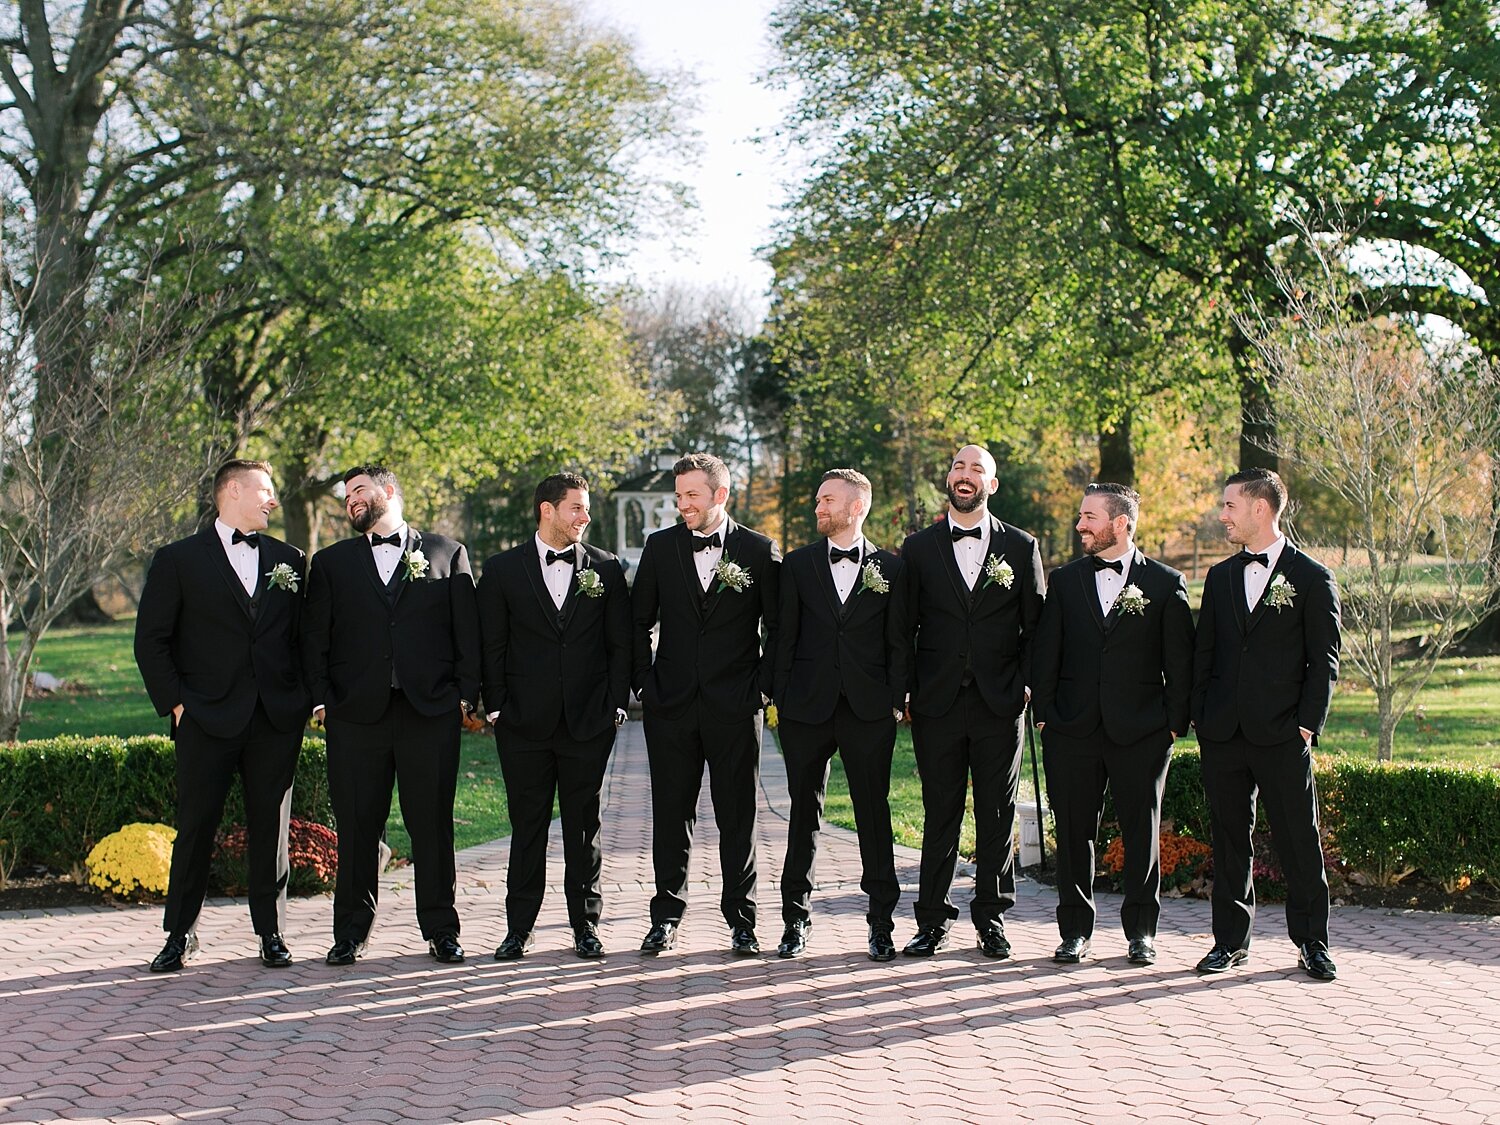 classic groom and groomsmen attire from Calvin Klein photographed by Asher Gardner Photography